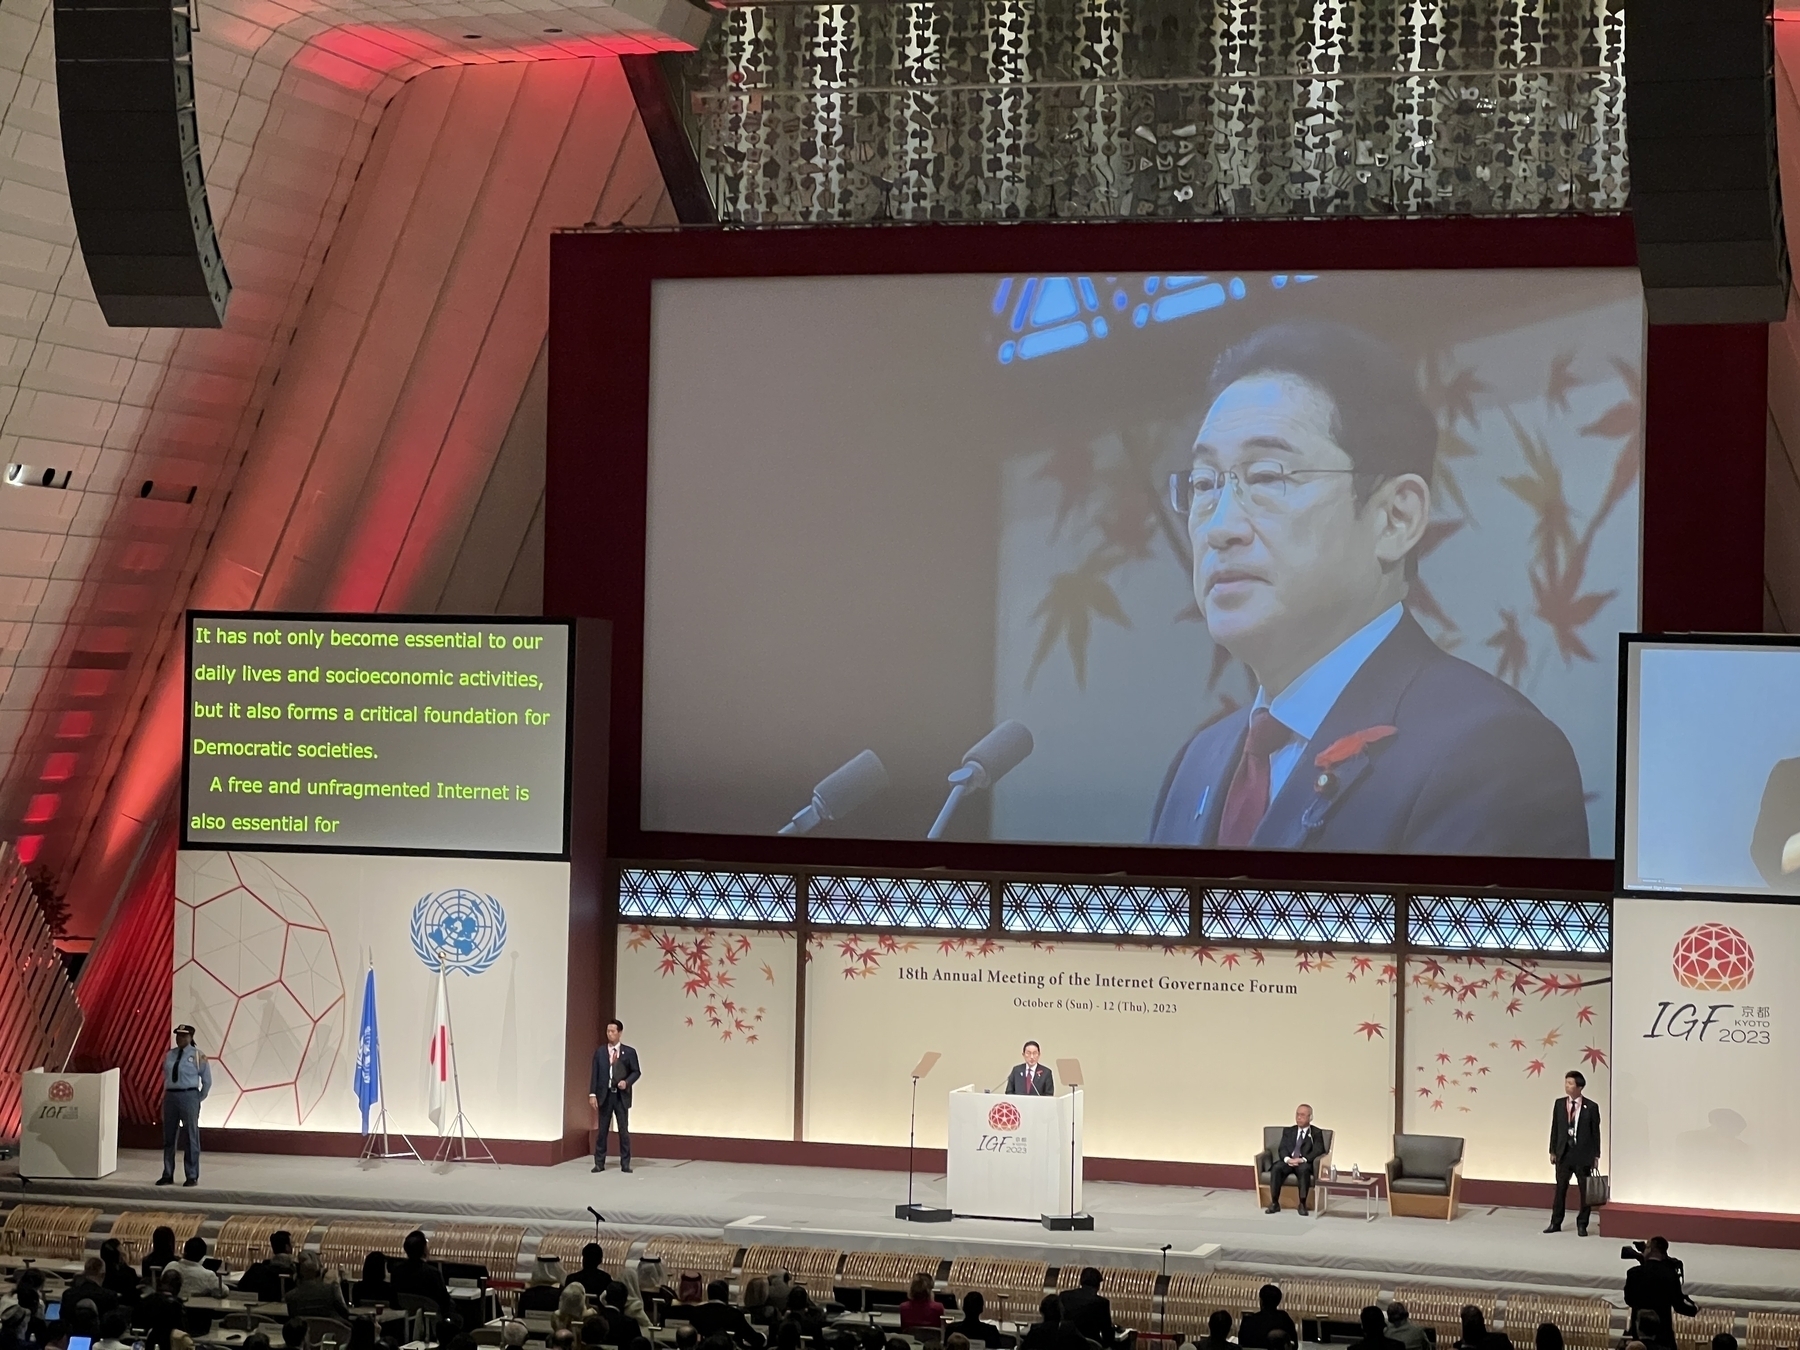 Japanese Prime Minister Kishida delivers a speech. The captions screen displays the lines:&10;&10;It has not only become essential to our daily lives and socioeconomic activities, but it also forms a critical foundation for Democratic societies.&10;A free and unfragmented Internet is also essential for… 